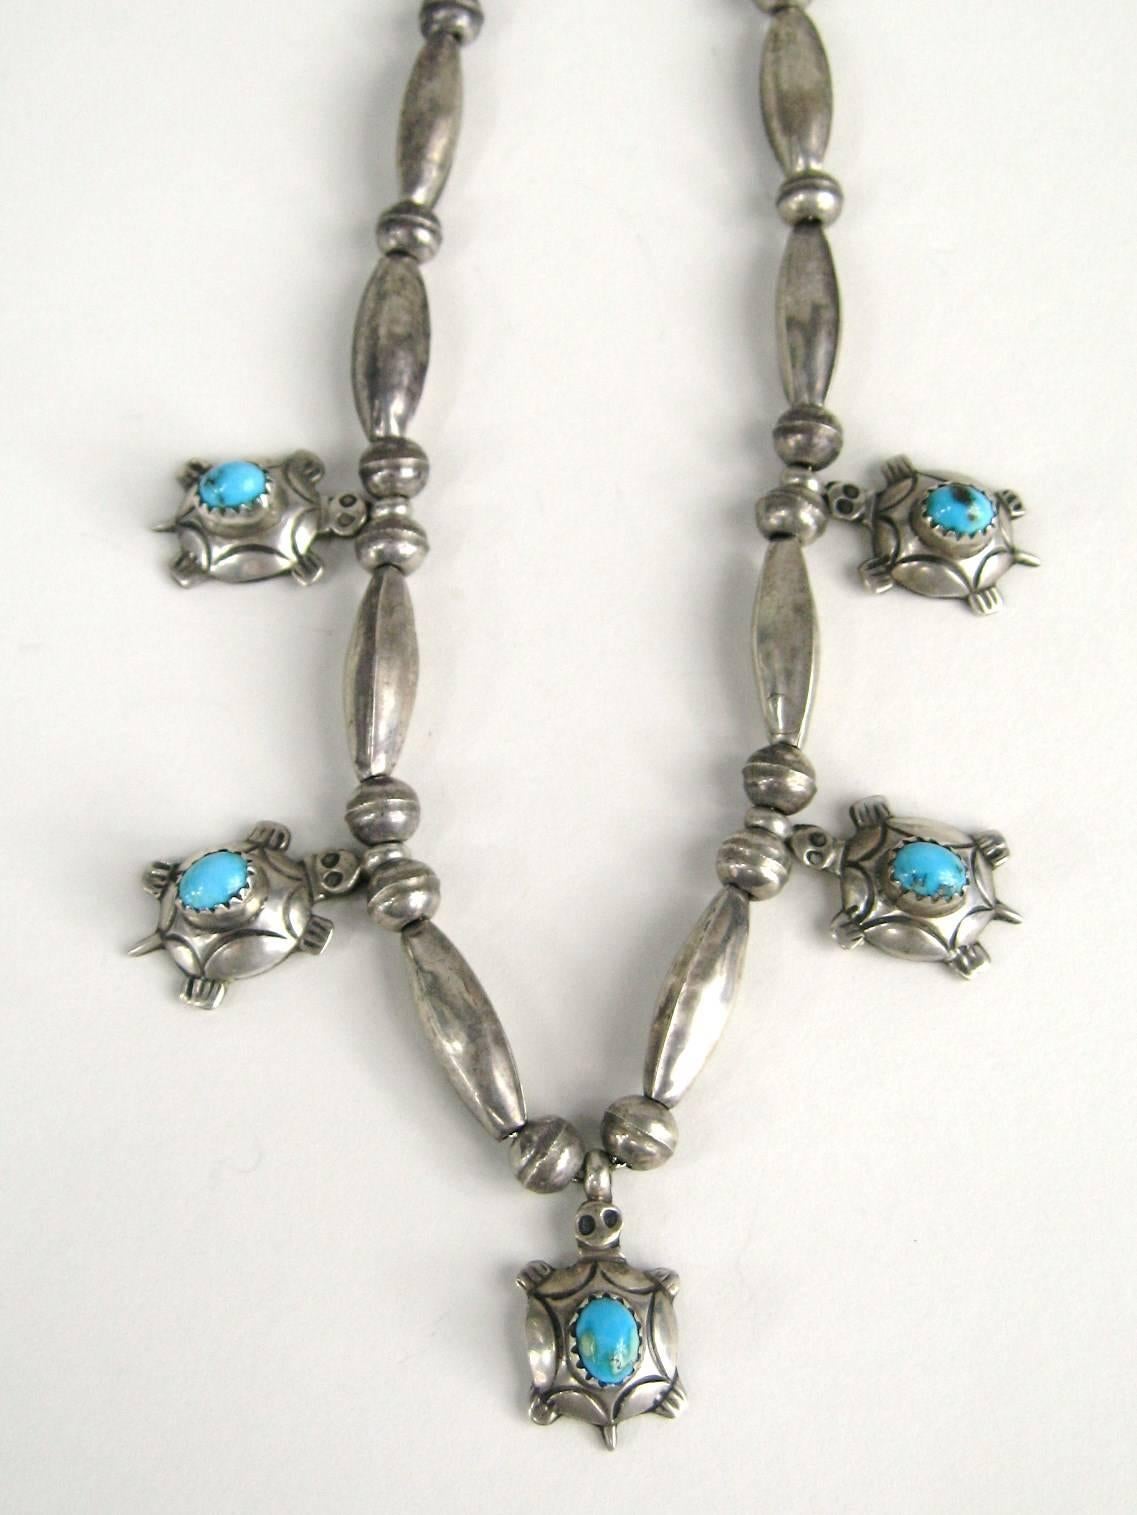 1950s sterling silver beaded necklace with 5 turtles. Turquoise set in each turtle. measuring 16 inches. Hallmarked on the back. Patina as found. This is out of a massive collection of Hopi, Zuni, Navajo, Southwestern, sterling silver, costume